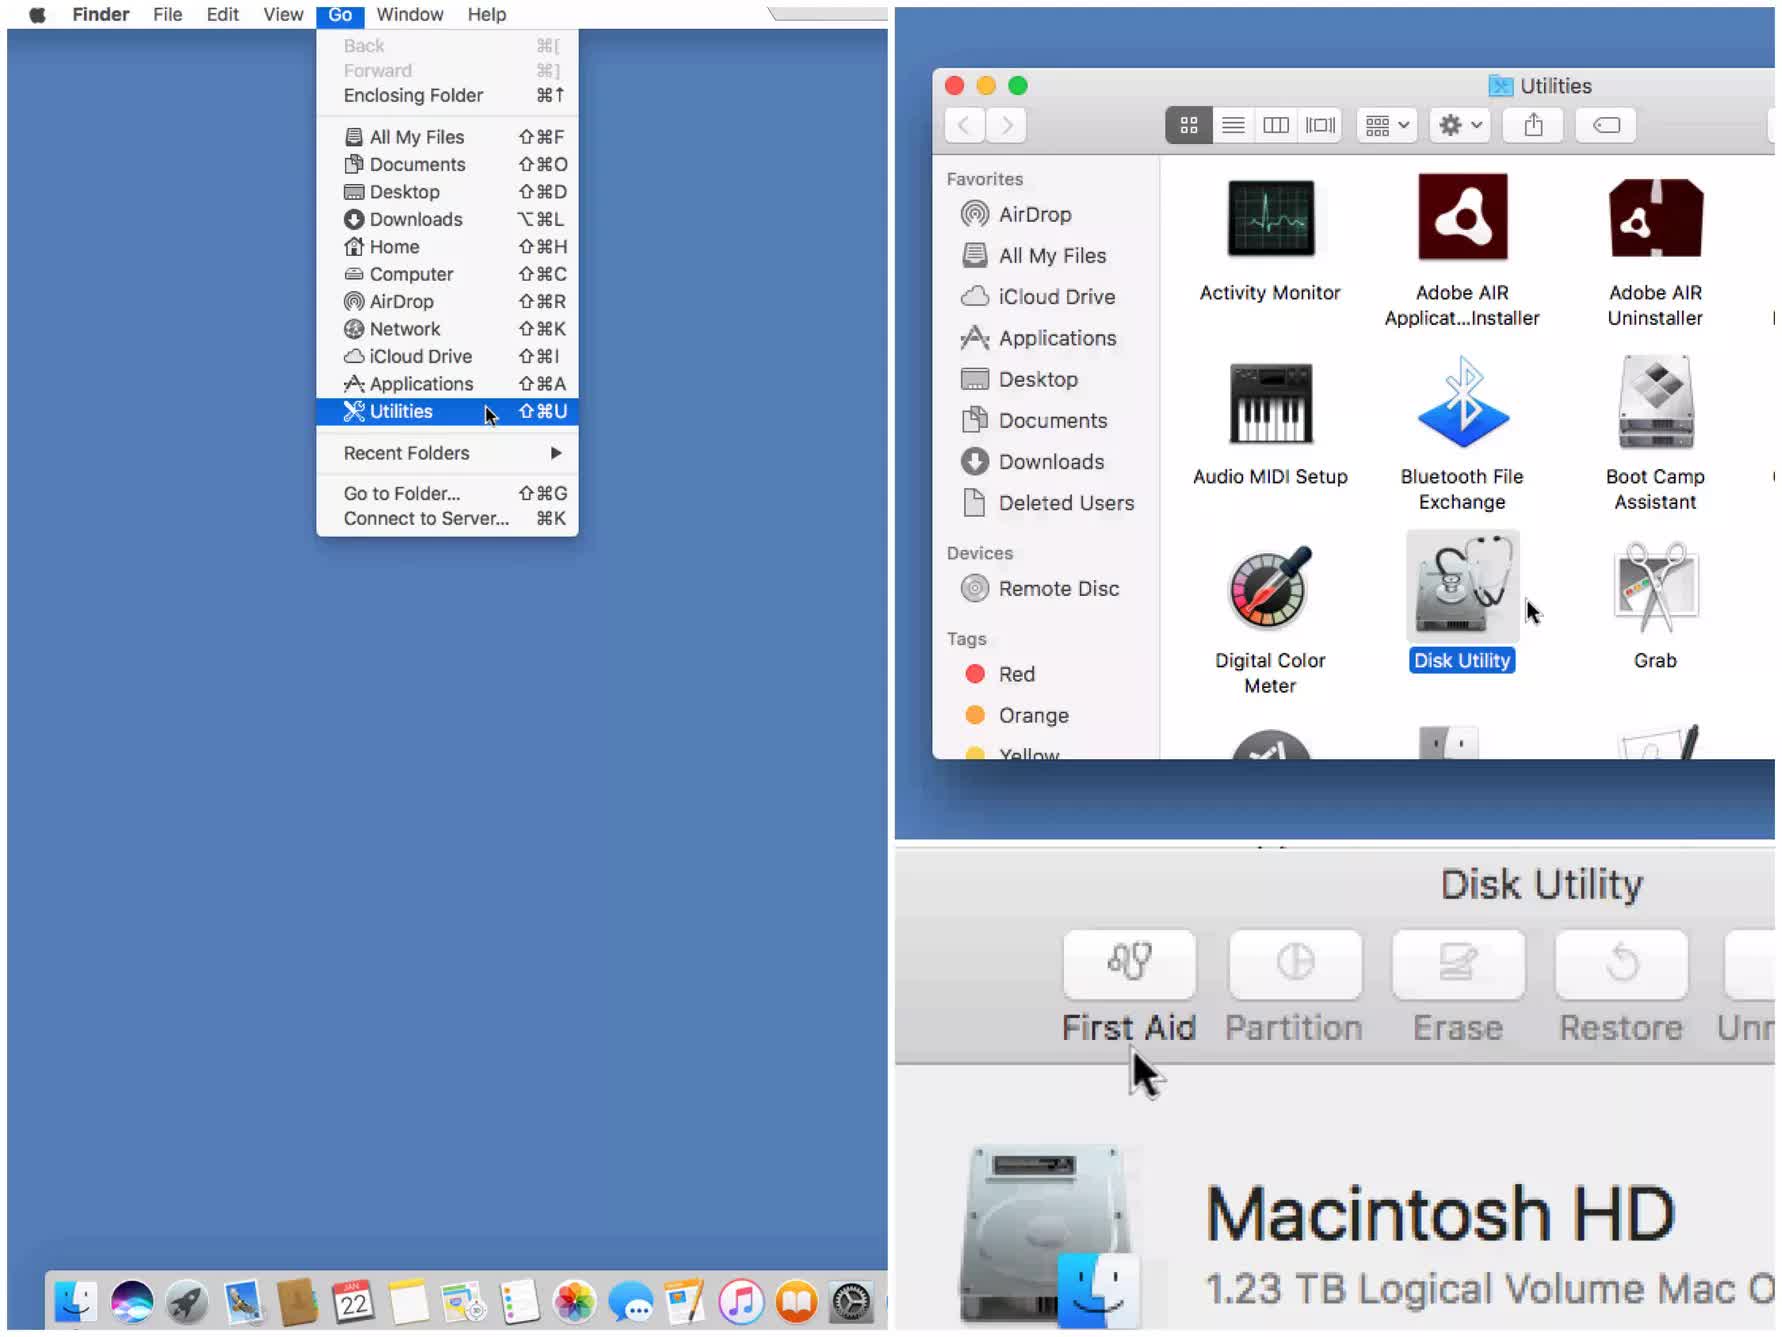 mac disk image cannot be recognized